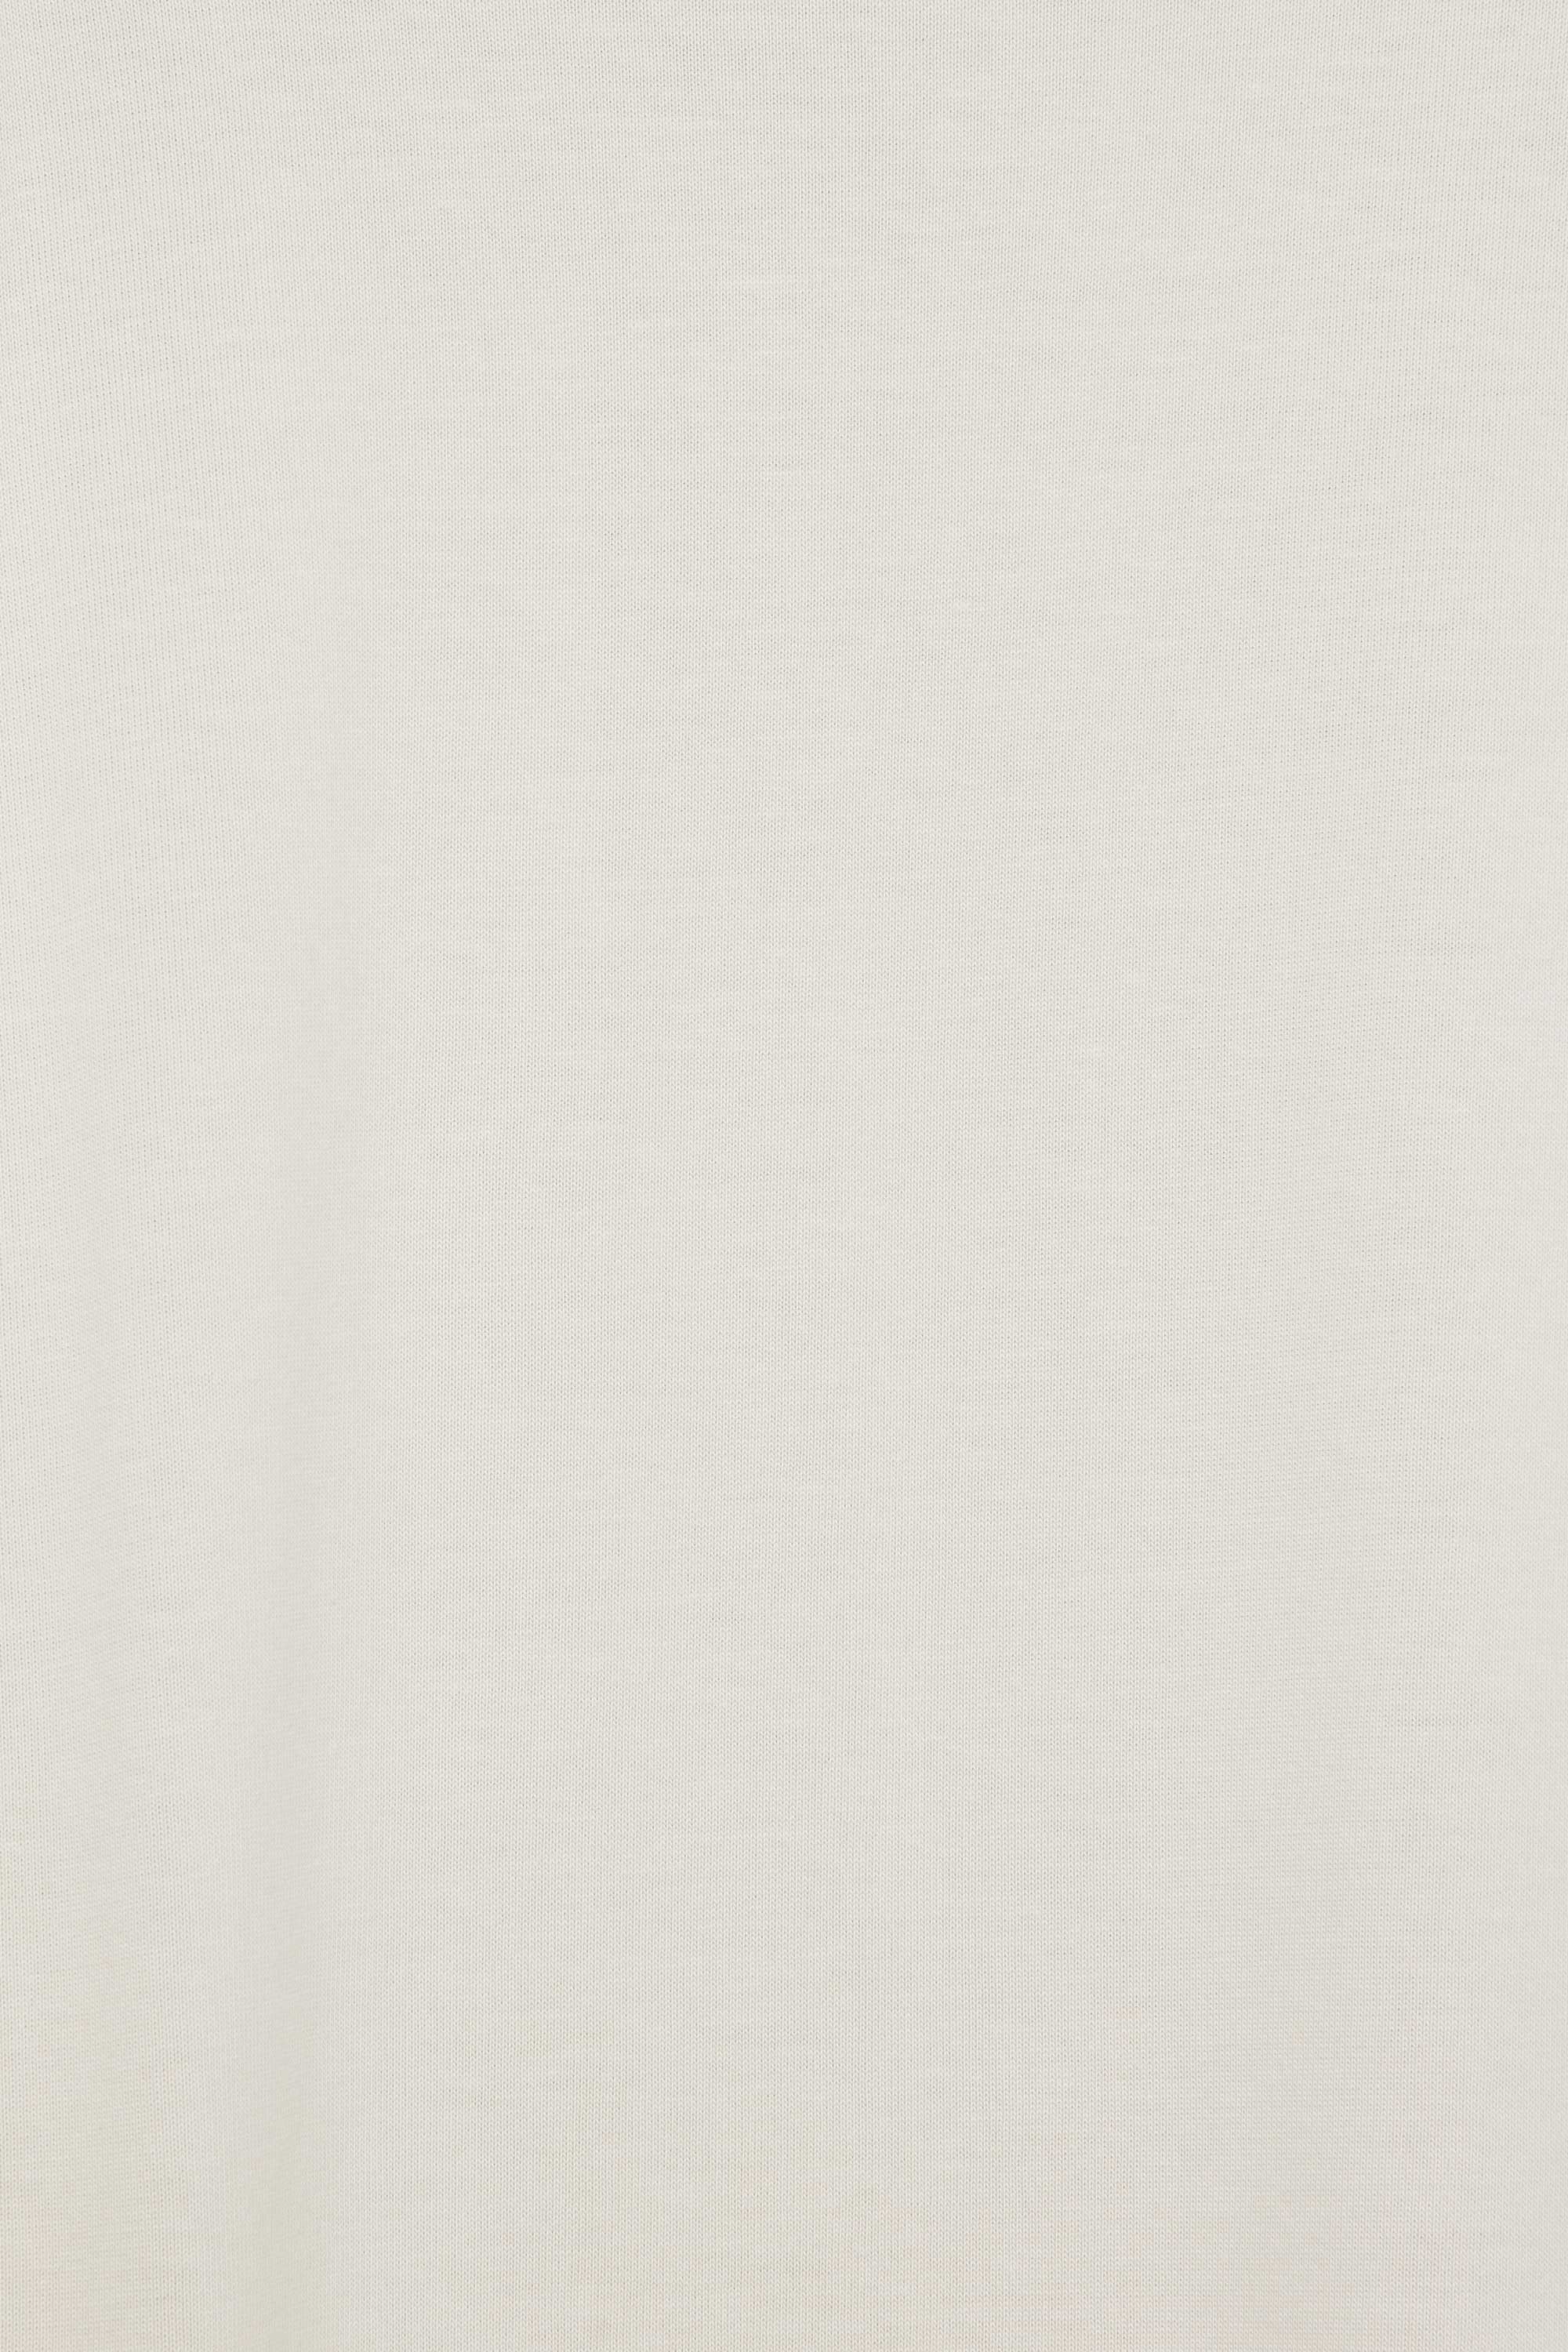 20//1 RECYCLE SUVIN ORGANIC COTTON KNIT BASE BALL TEE L/S, Off White